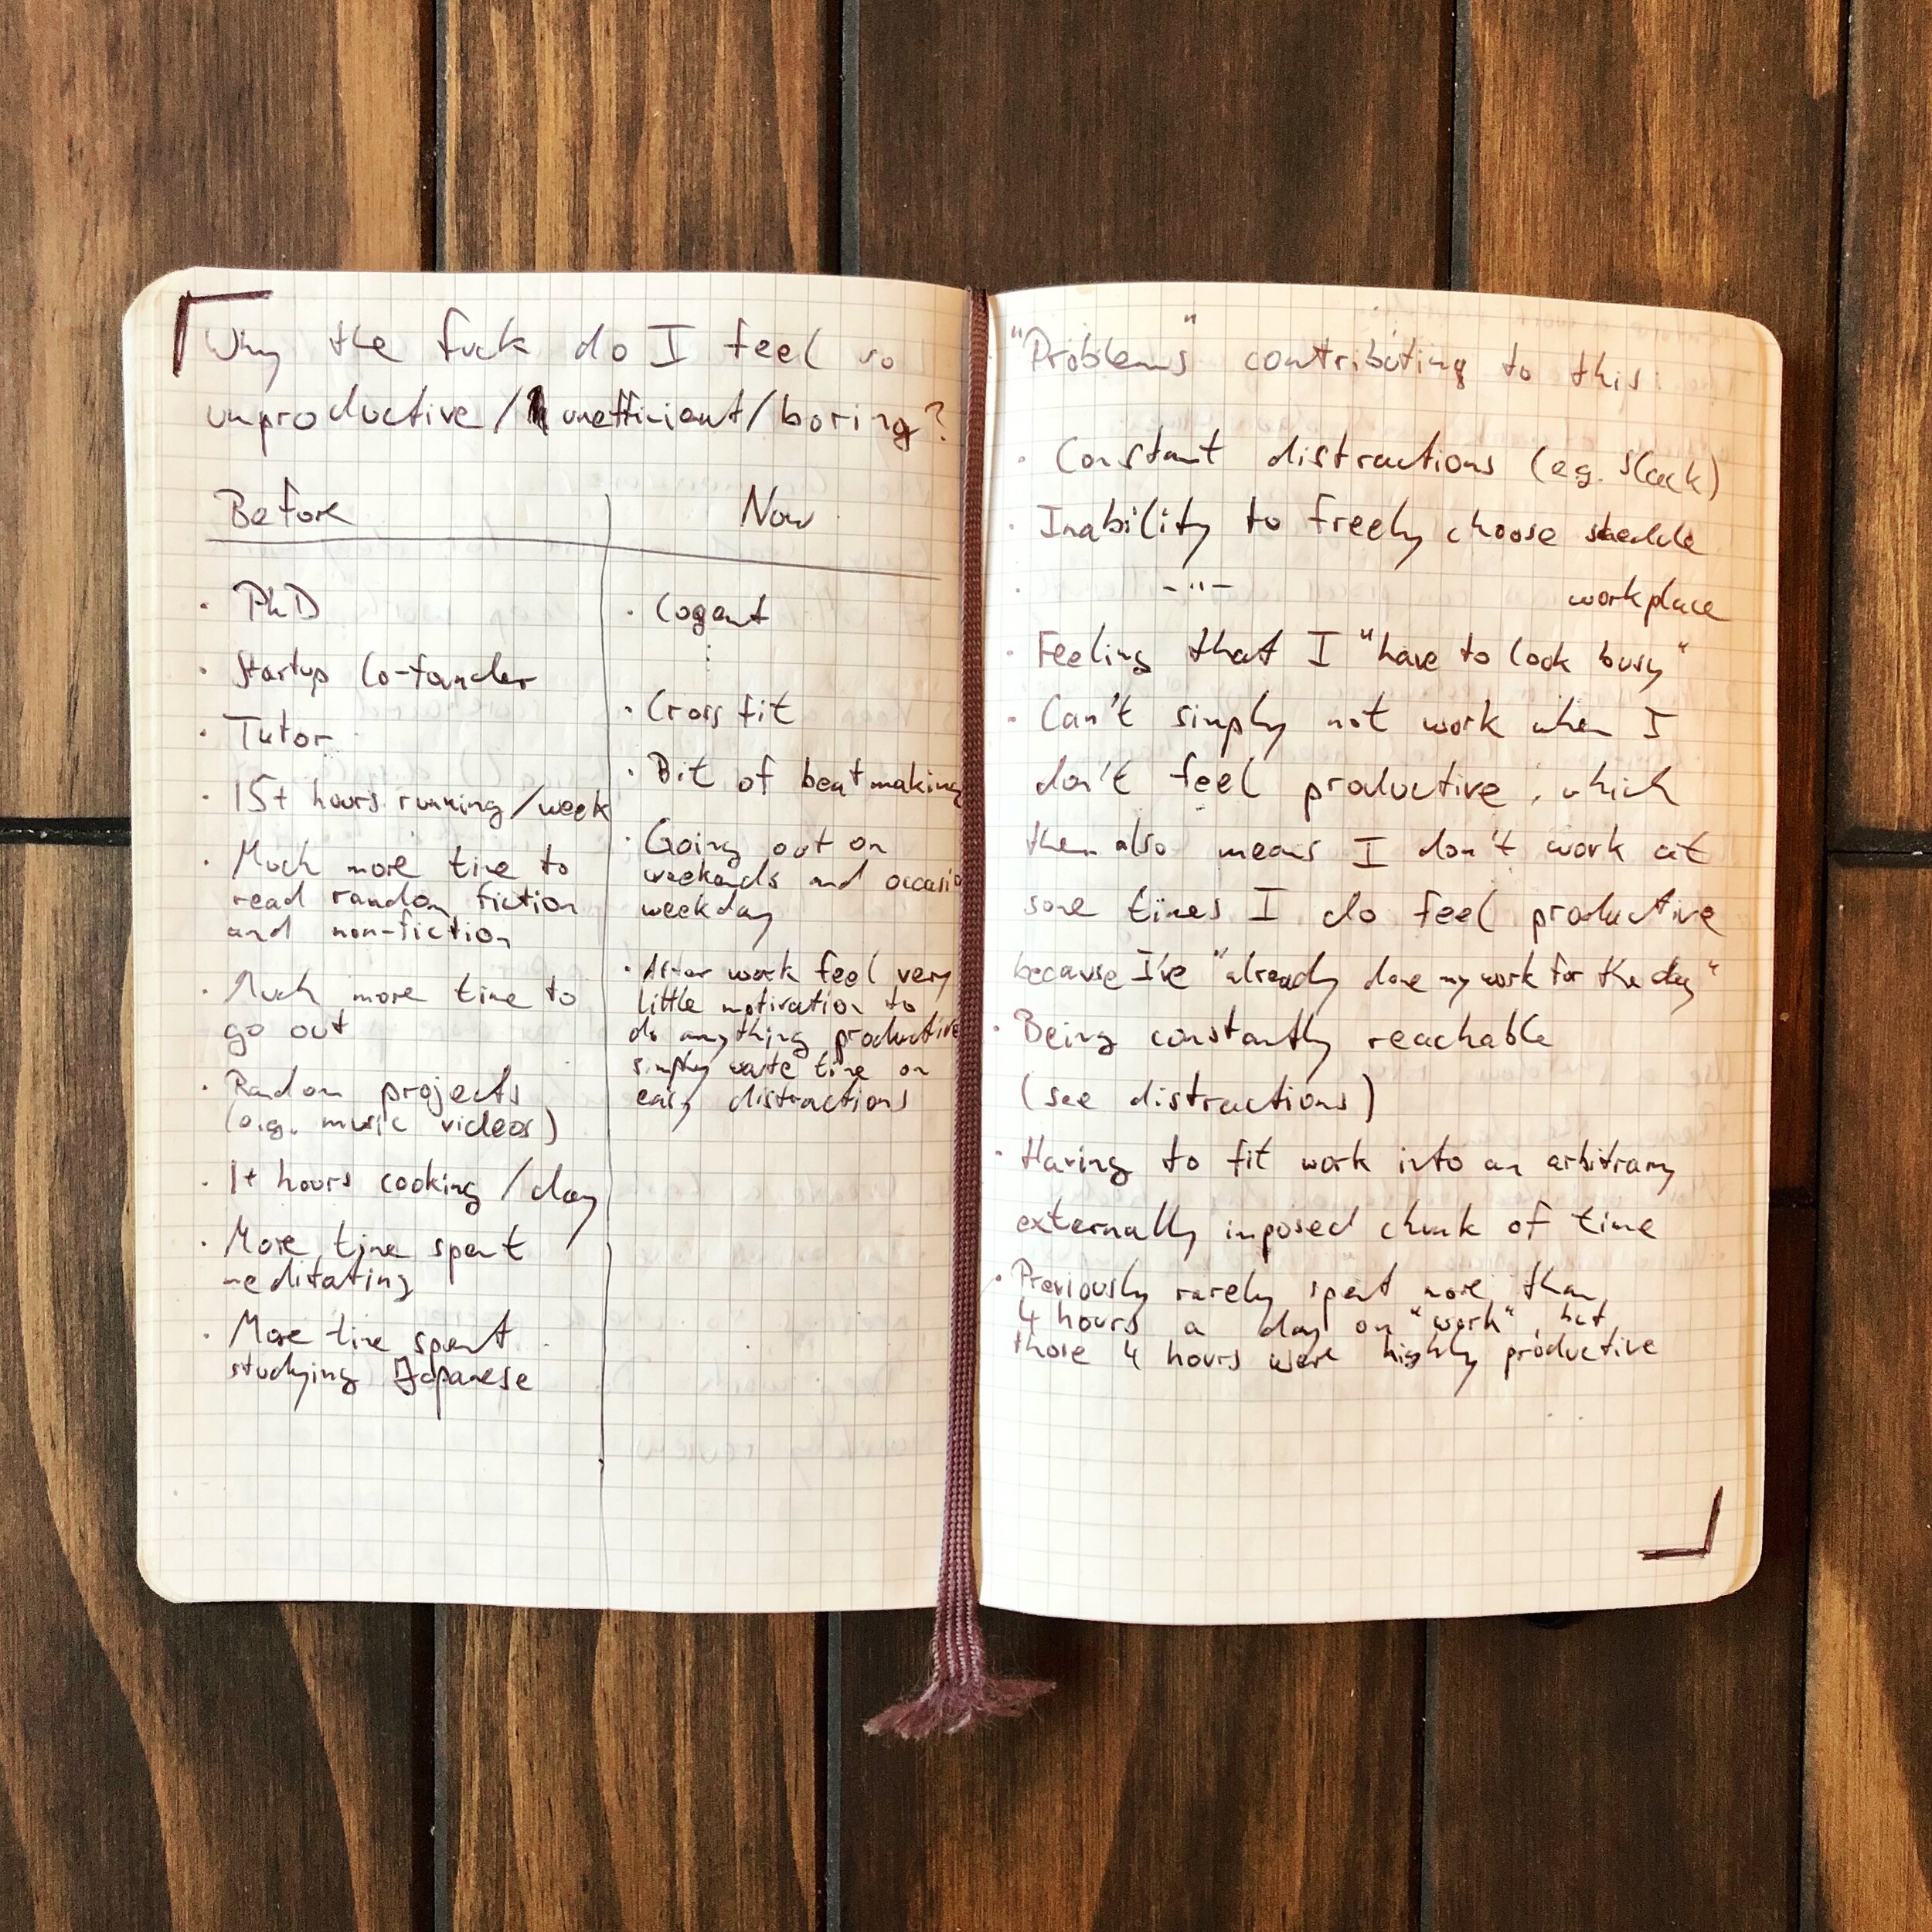 30 Minutes of Journaling that Changed My Life, by Max Frenzel, PhD